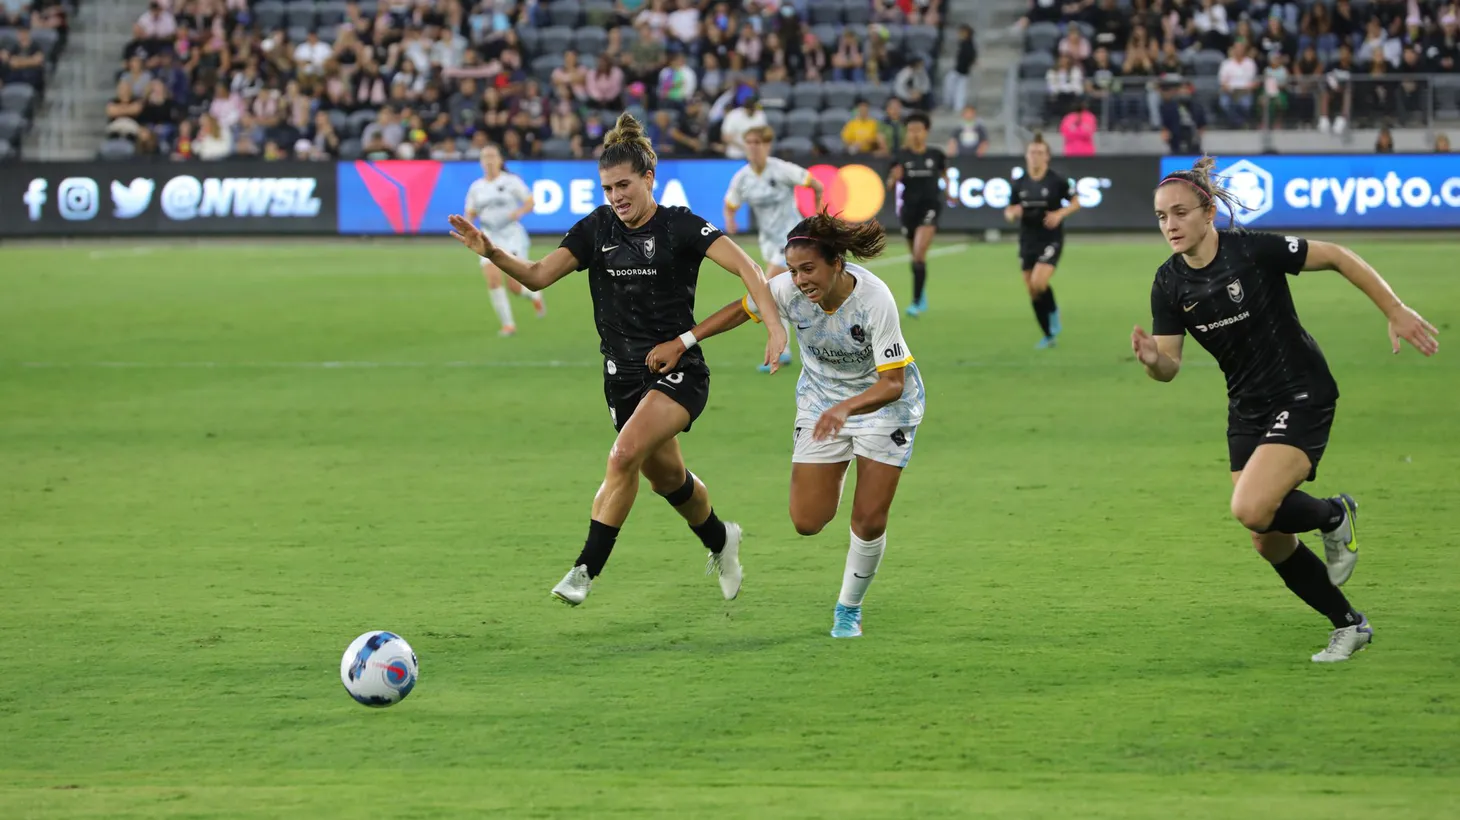 Players fight for the ball in a June 2022 game between Angel City FC and the Houston Dash.